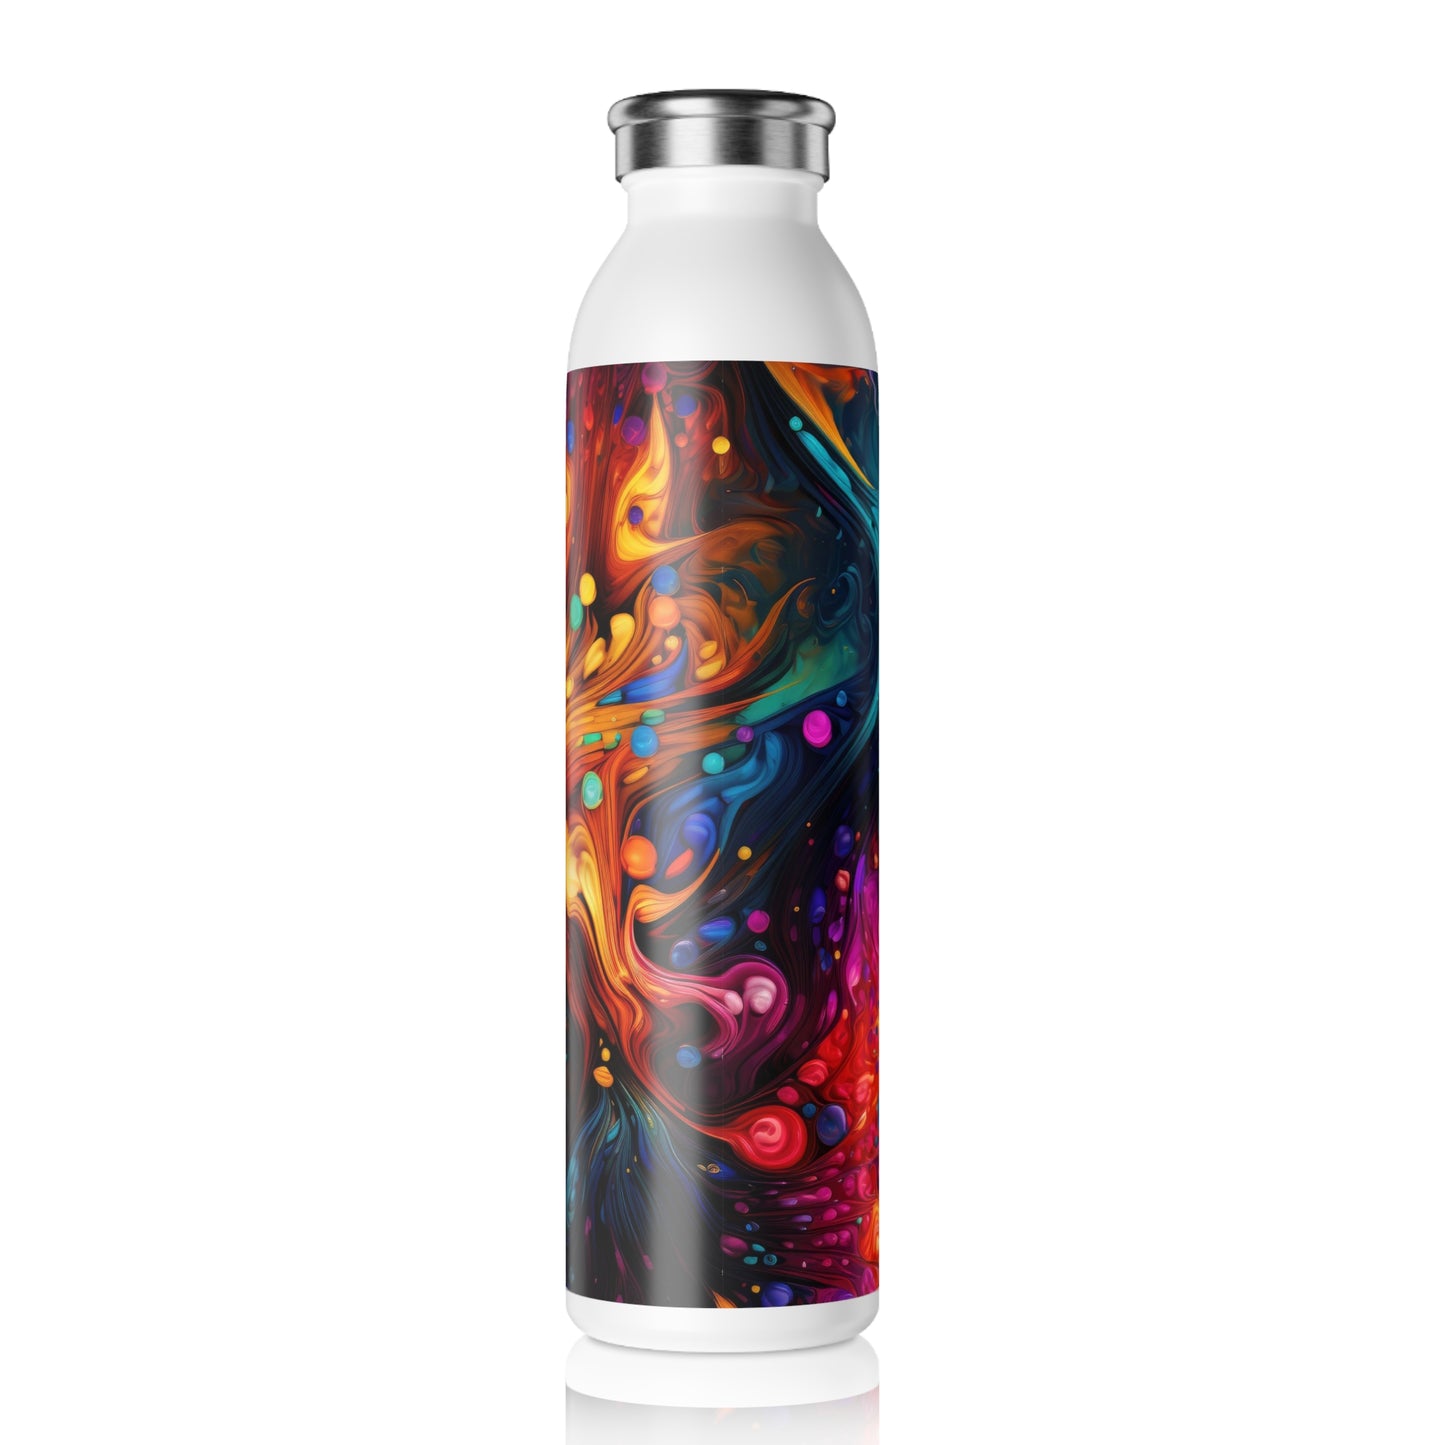 Colorful Psychedelic Kaleidoscope 1.6 - Slim Water Bottle - Stainless Steel - 20oz